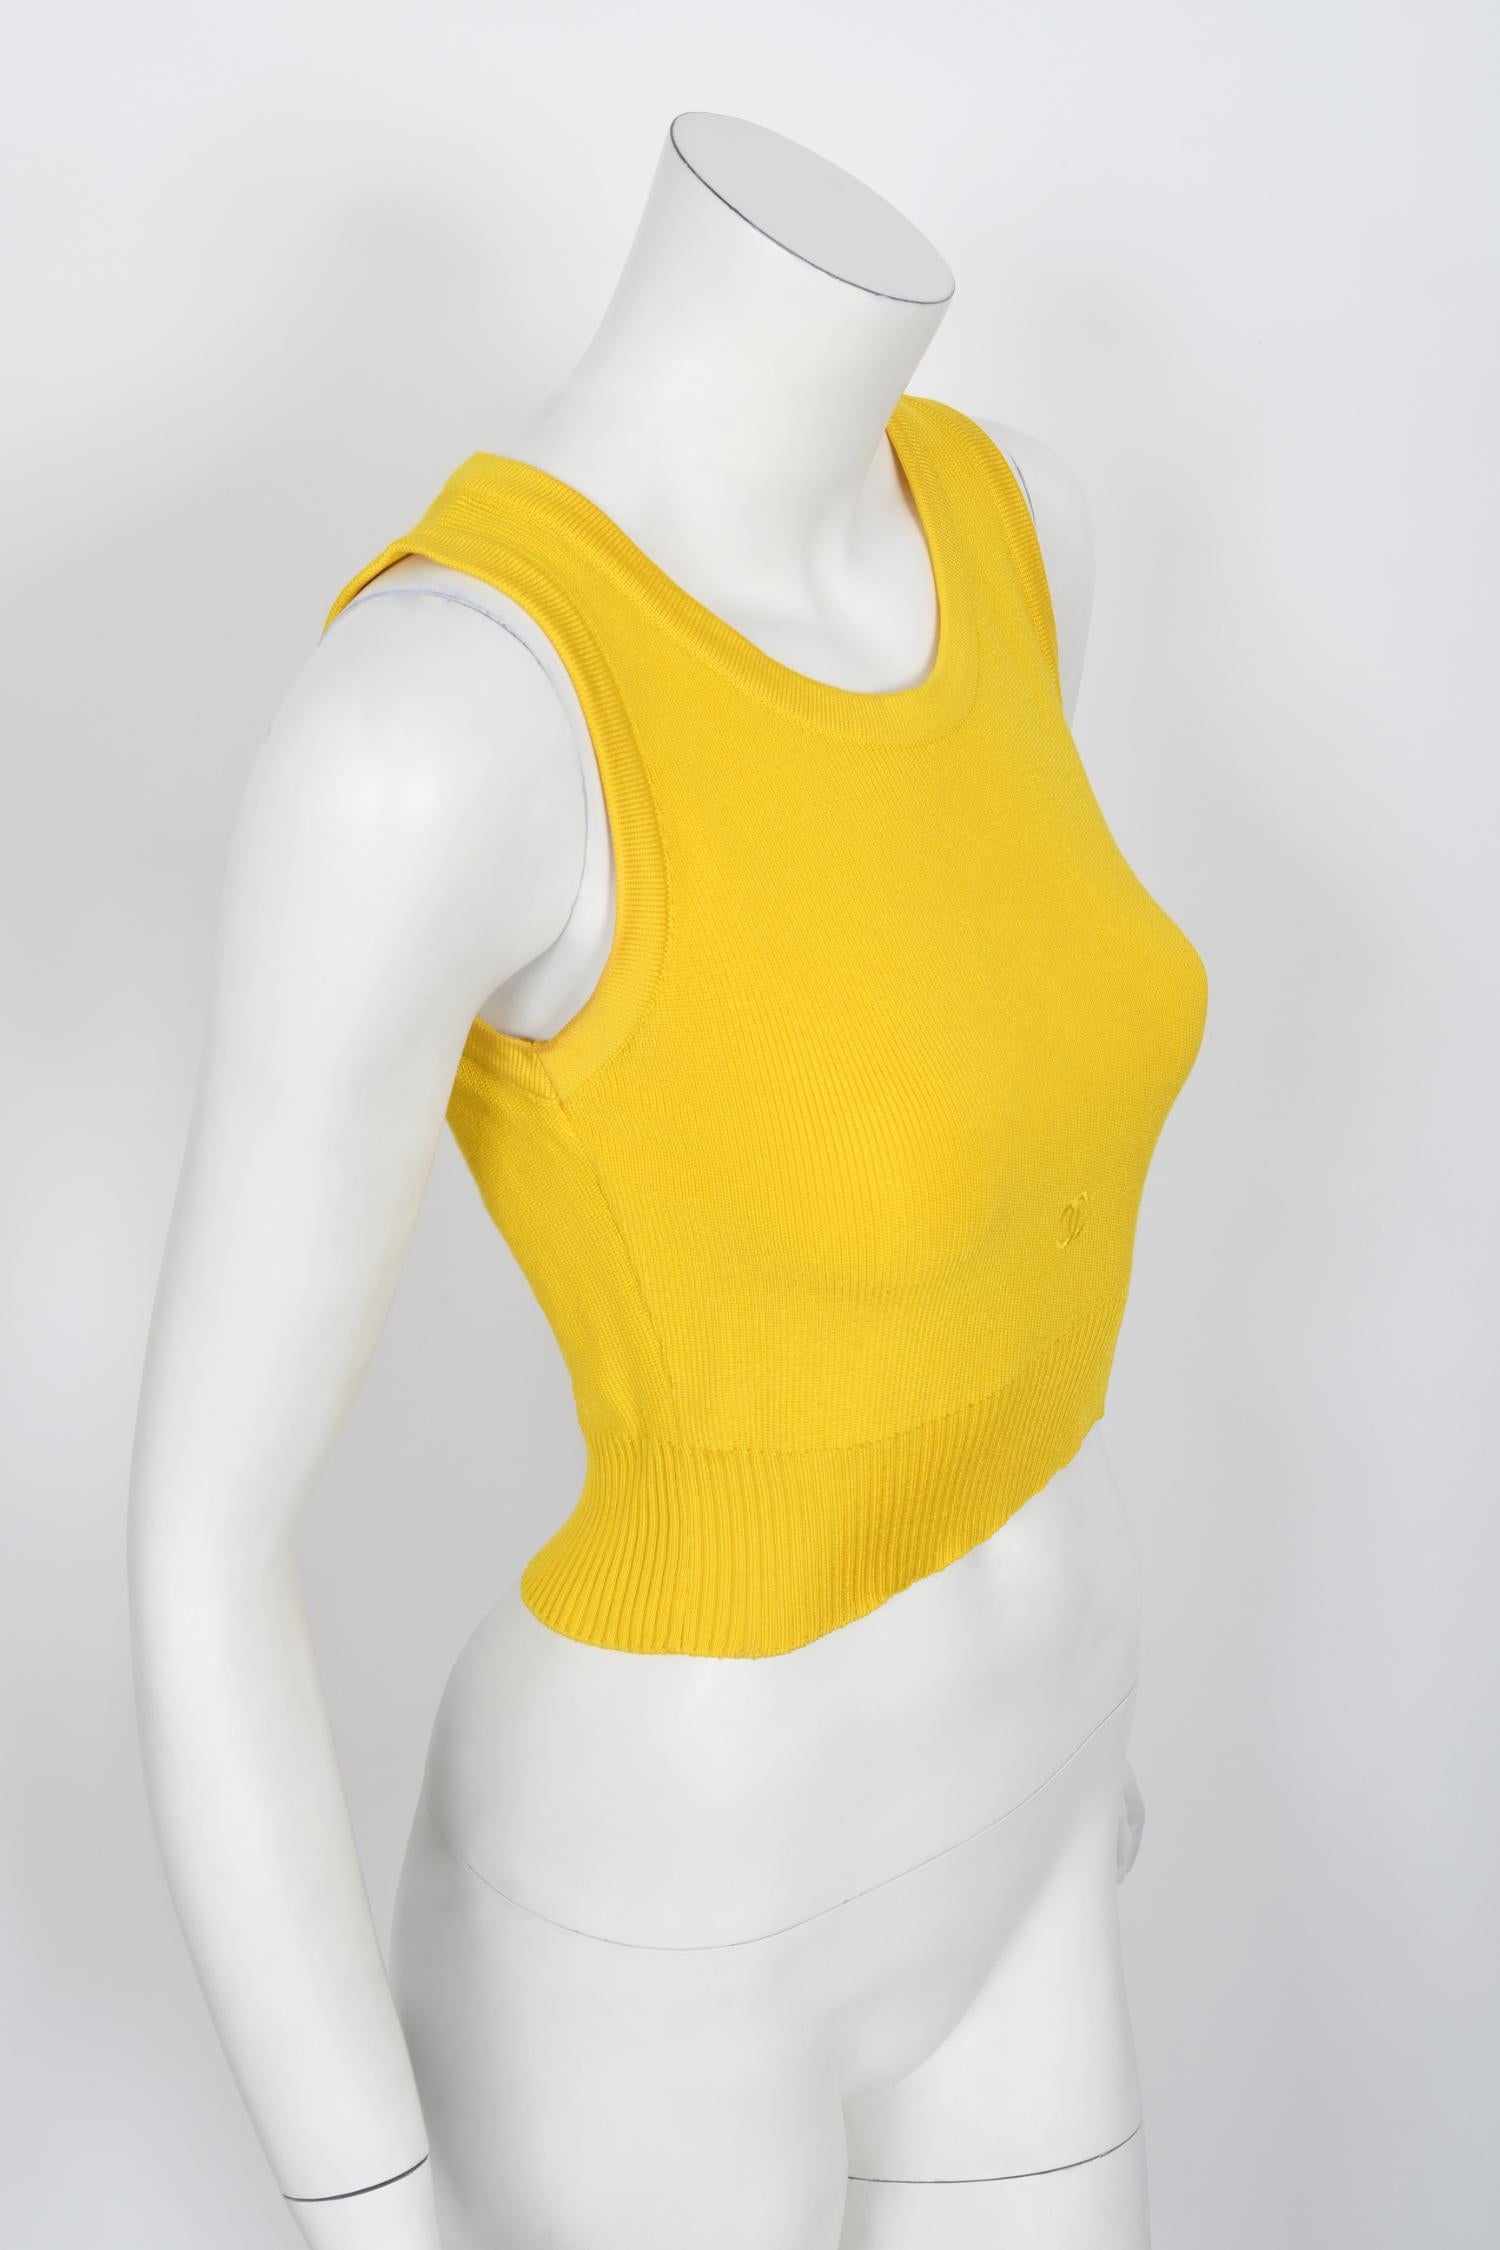 Vintage 1996 Chanel by Karl Lagerfeld Runway Yellow Knit Cropped Sweater Set  4